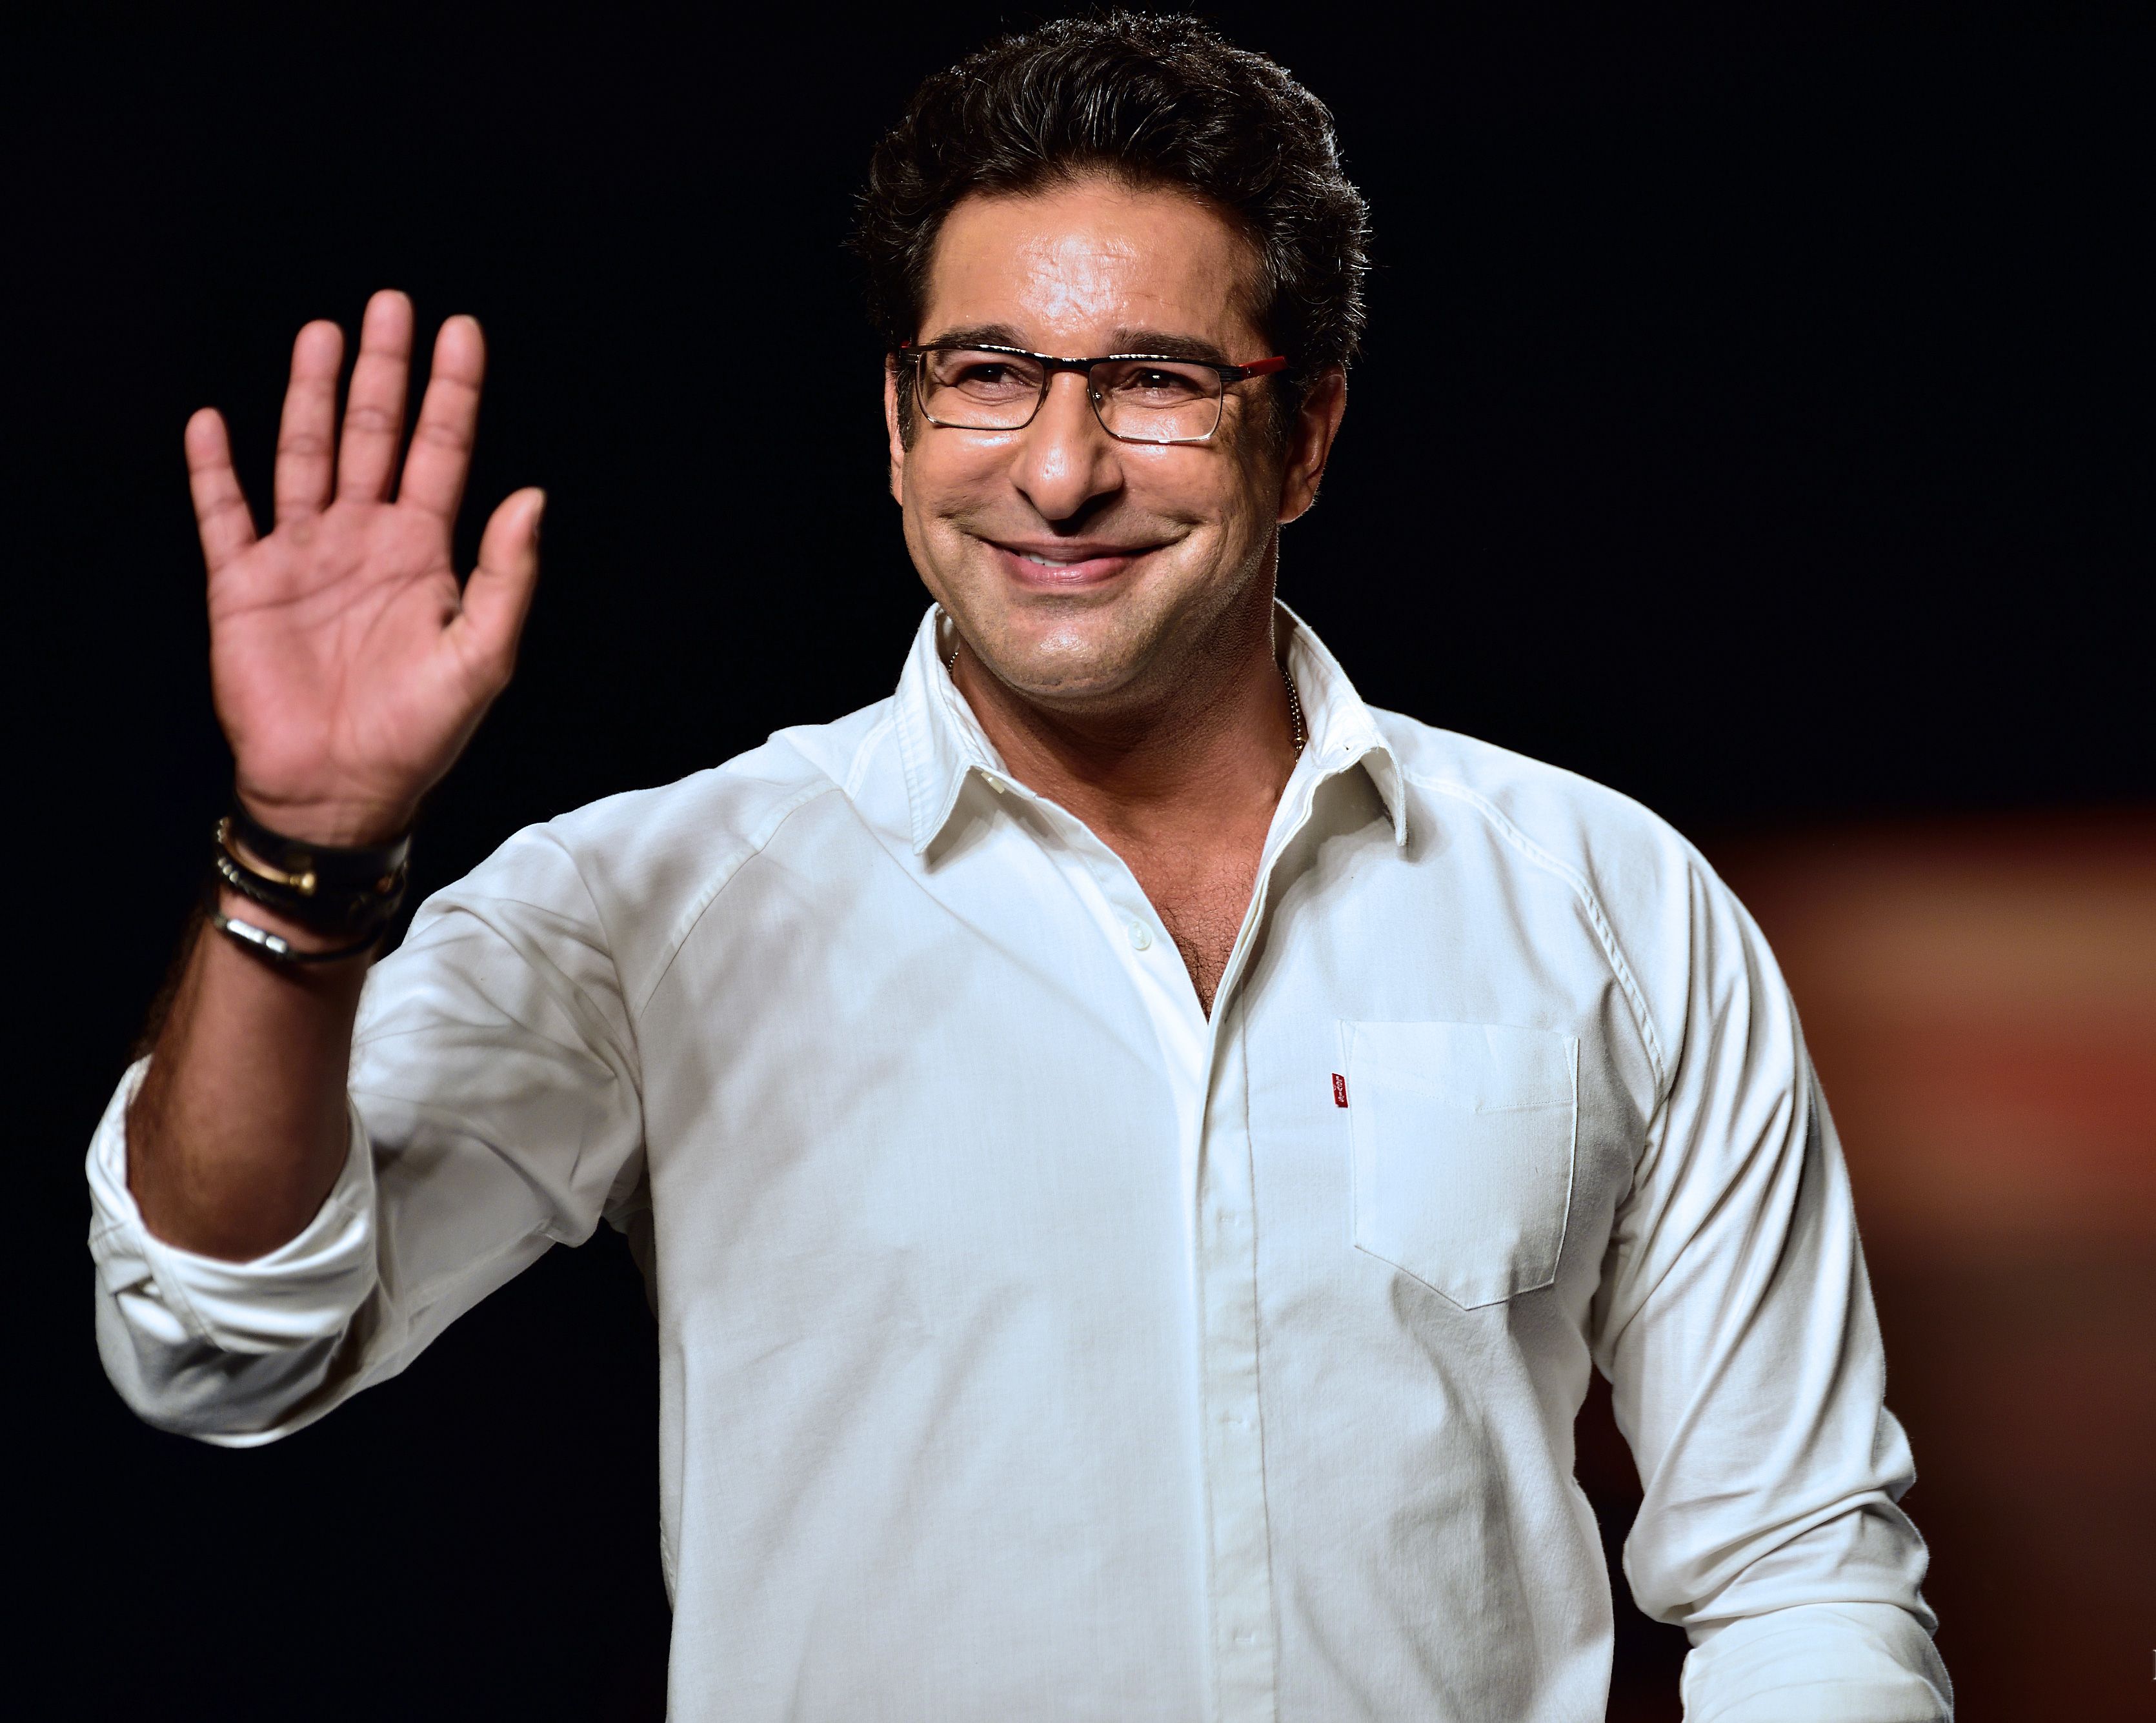 Wasim Akram insulin: Wasim Akram 'humiliated' at Manchester airport for  carrying insulin; authorities reply - The Economic Times